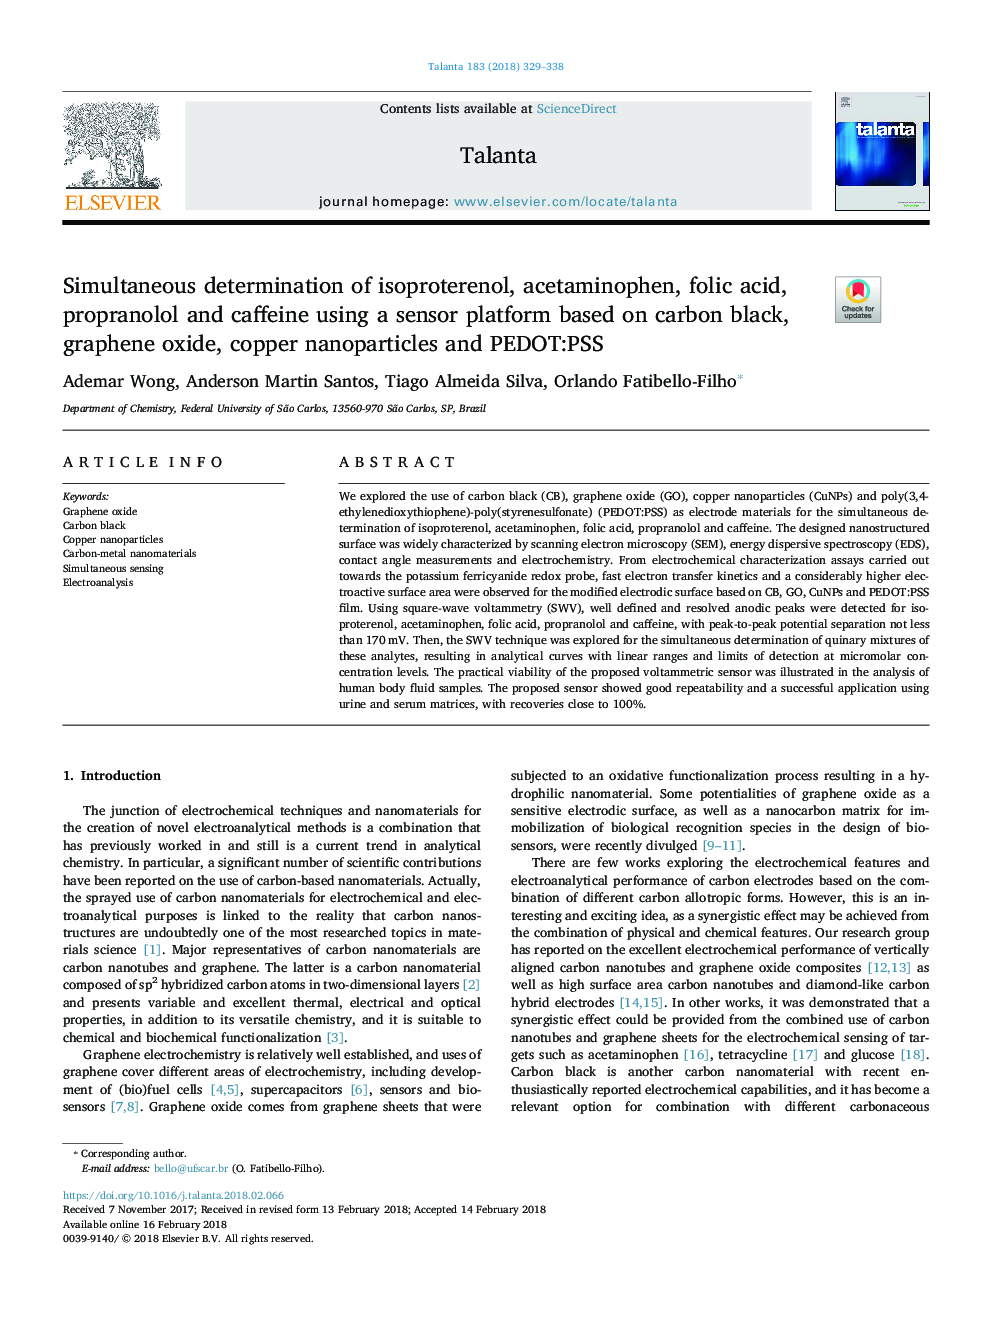 Simultaneous determination of isoproterenol, acetaminophen, folic acid, propranolol and caffeine using a sensor platform based on carbon black, graphene oxide, copper nanoparticles and PEDOT:PSS